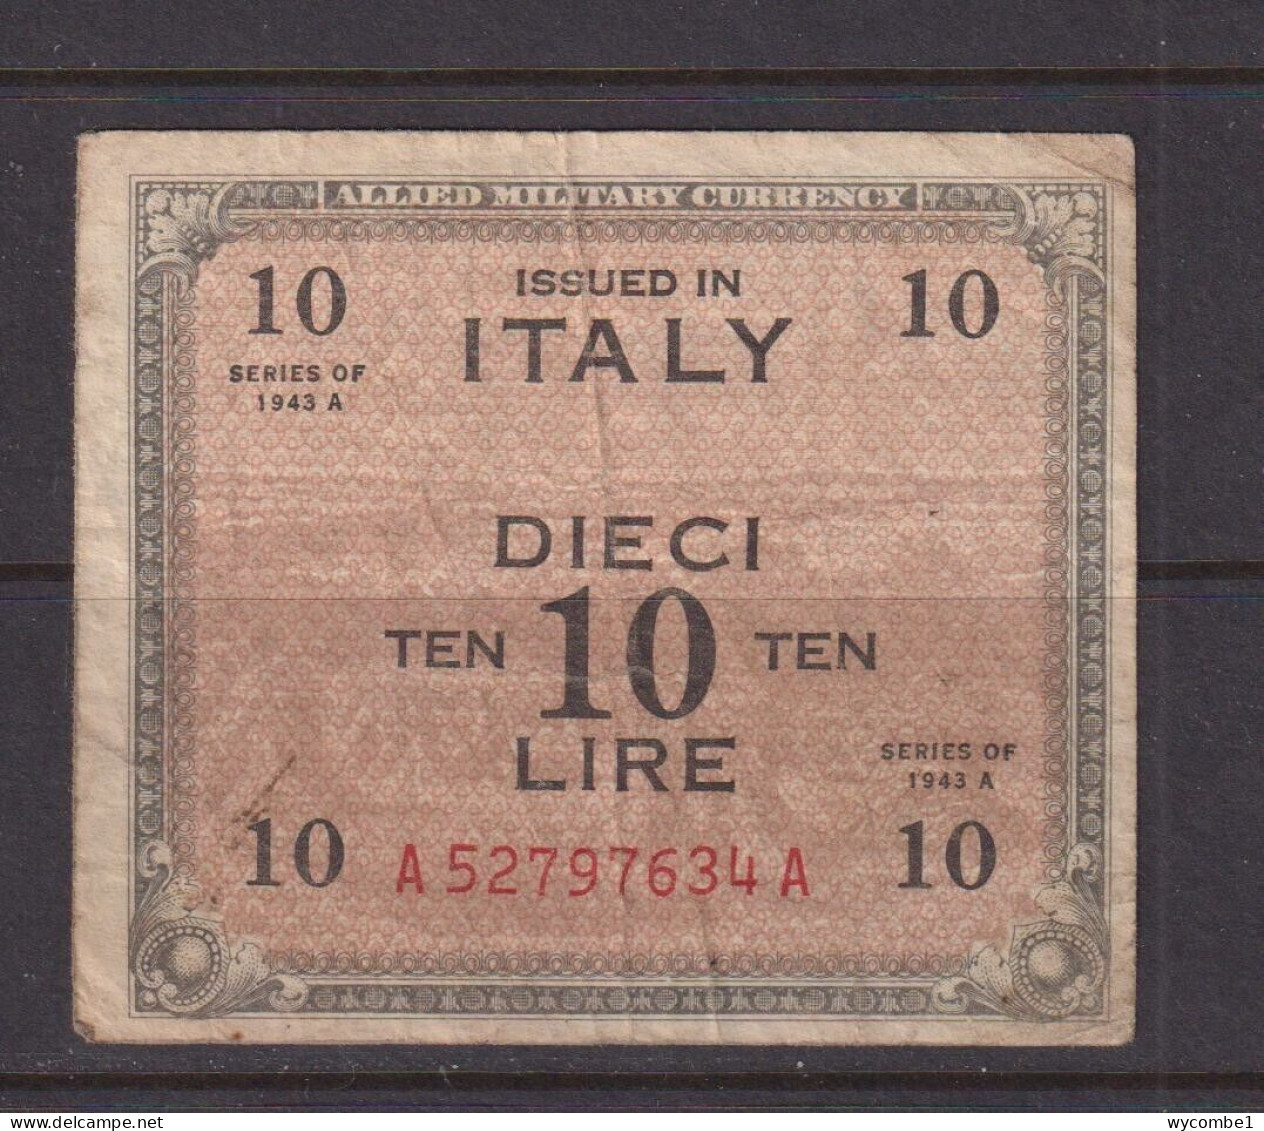 ITALY - 1943 Allied Military Currency 10 Lira Circulated Banknote - Allied Occupation WWII